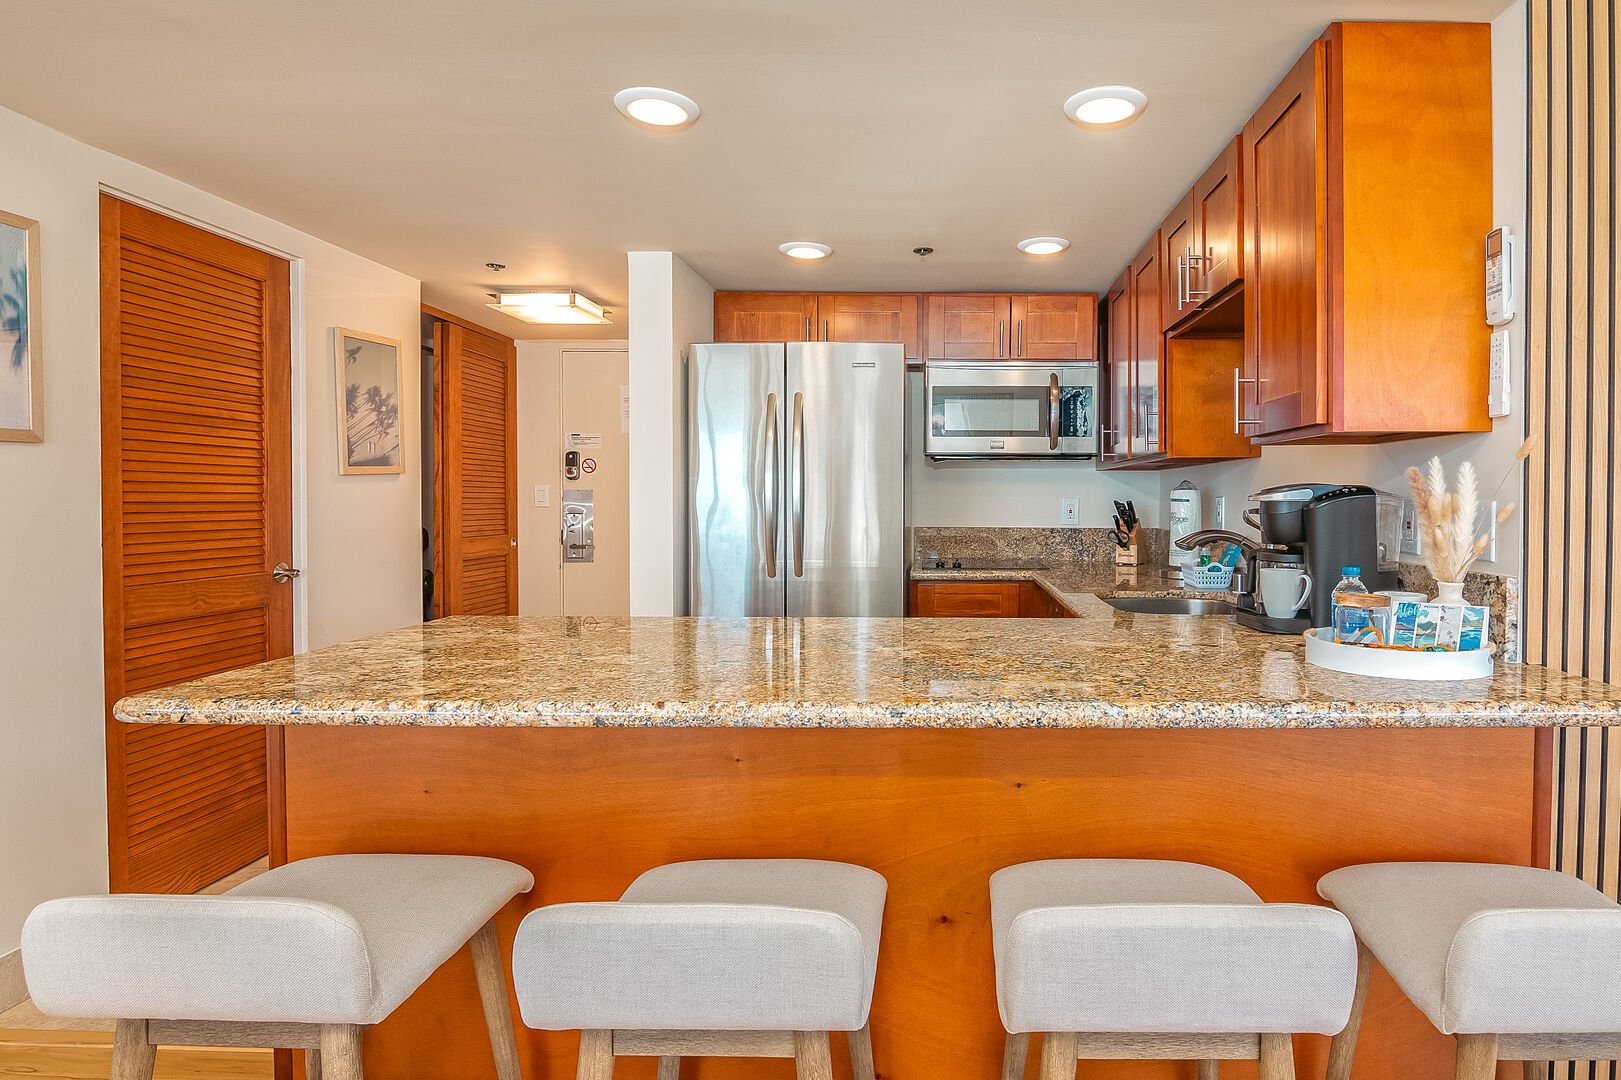 Fully equipped kitchen with countertop and 4 bar stools.